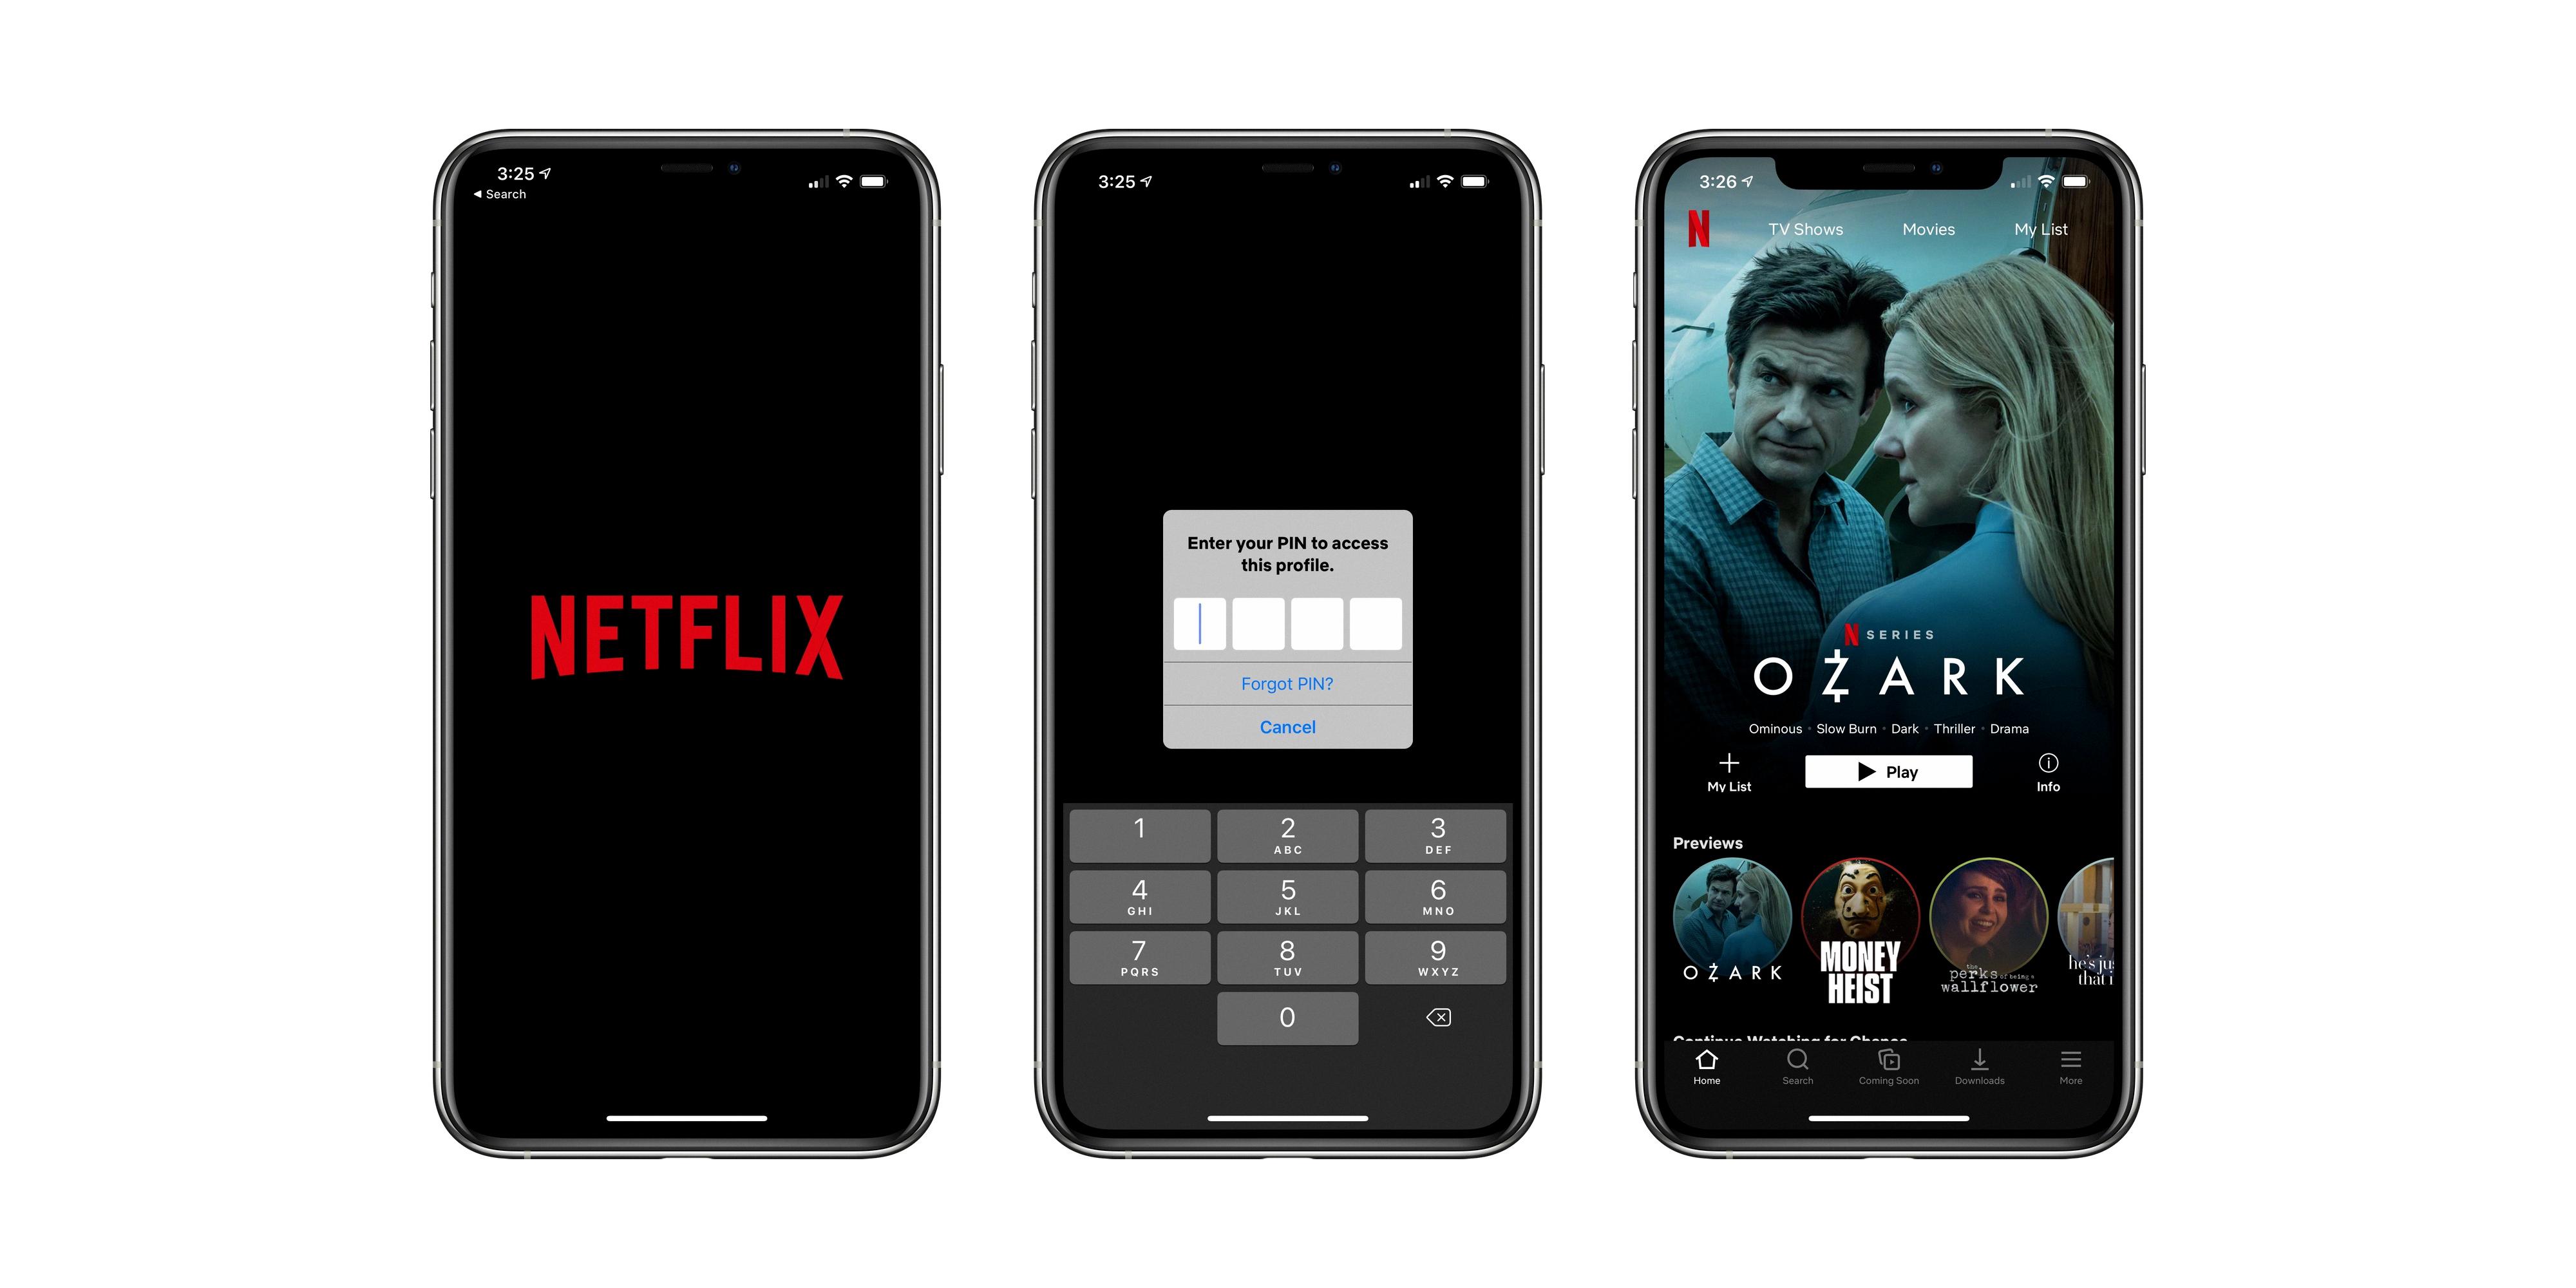 How to Lock Your Netflix Profile On iPhone? 13